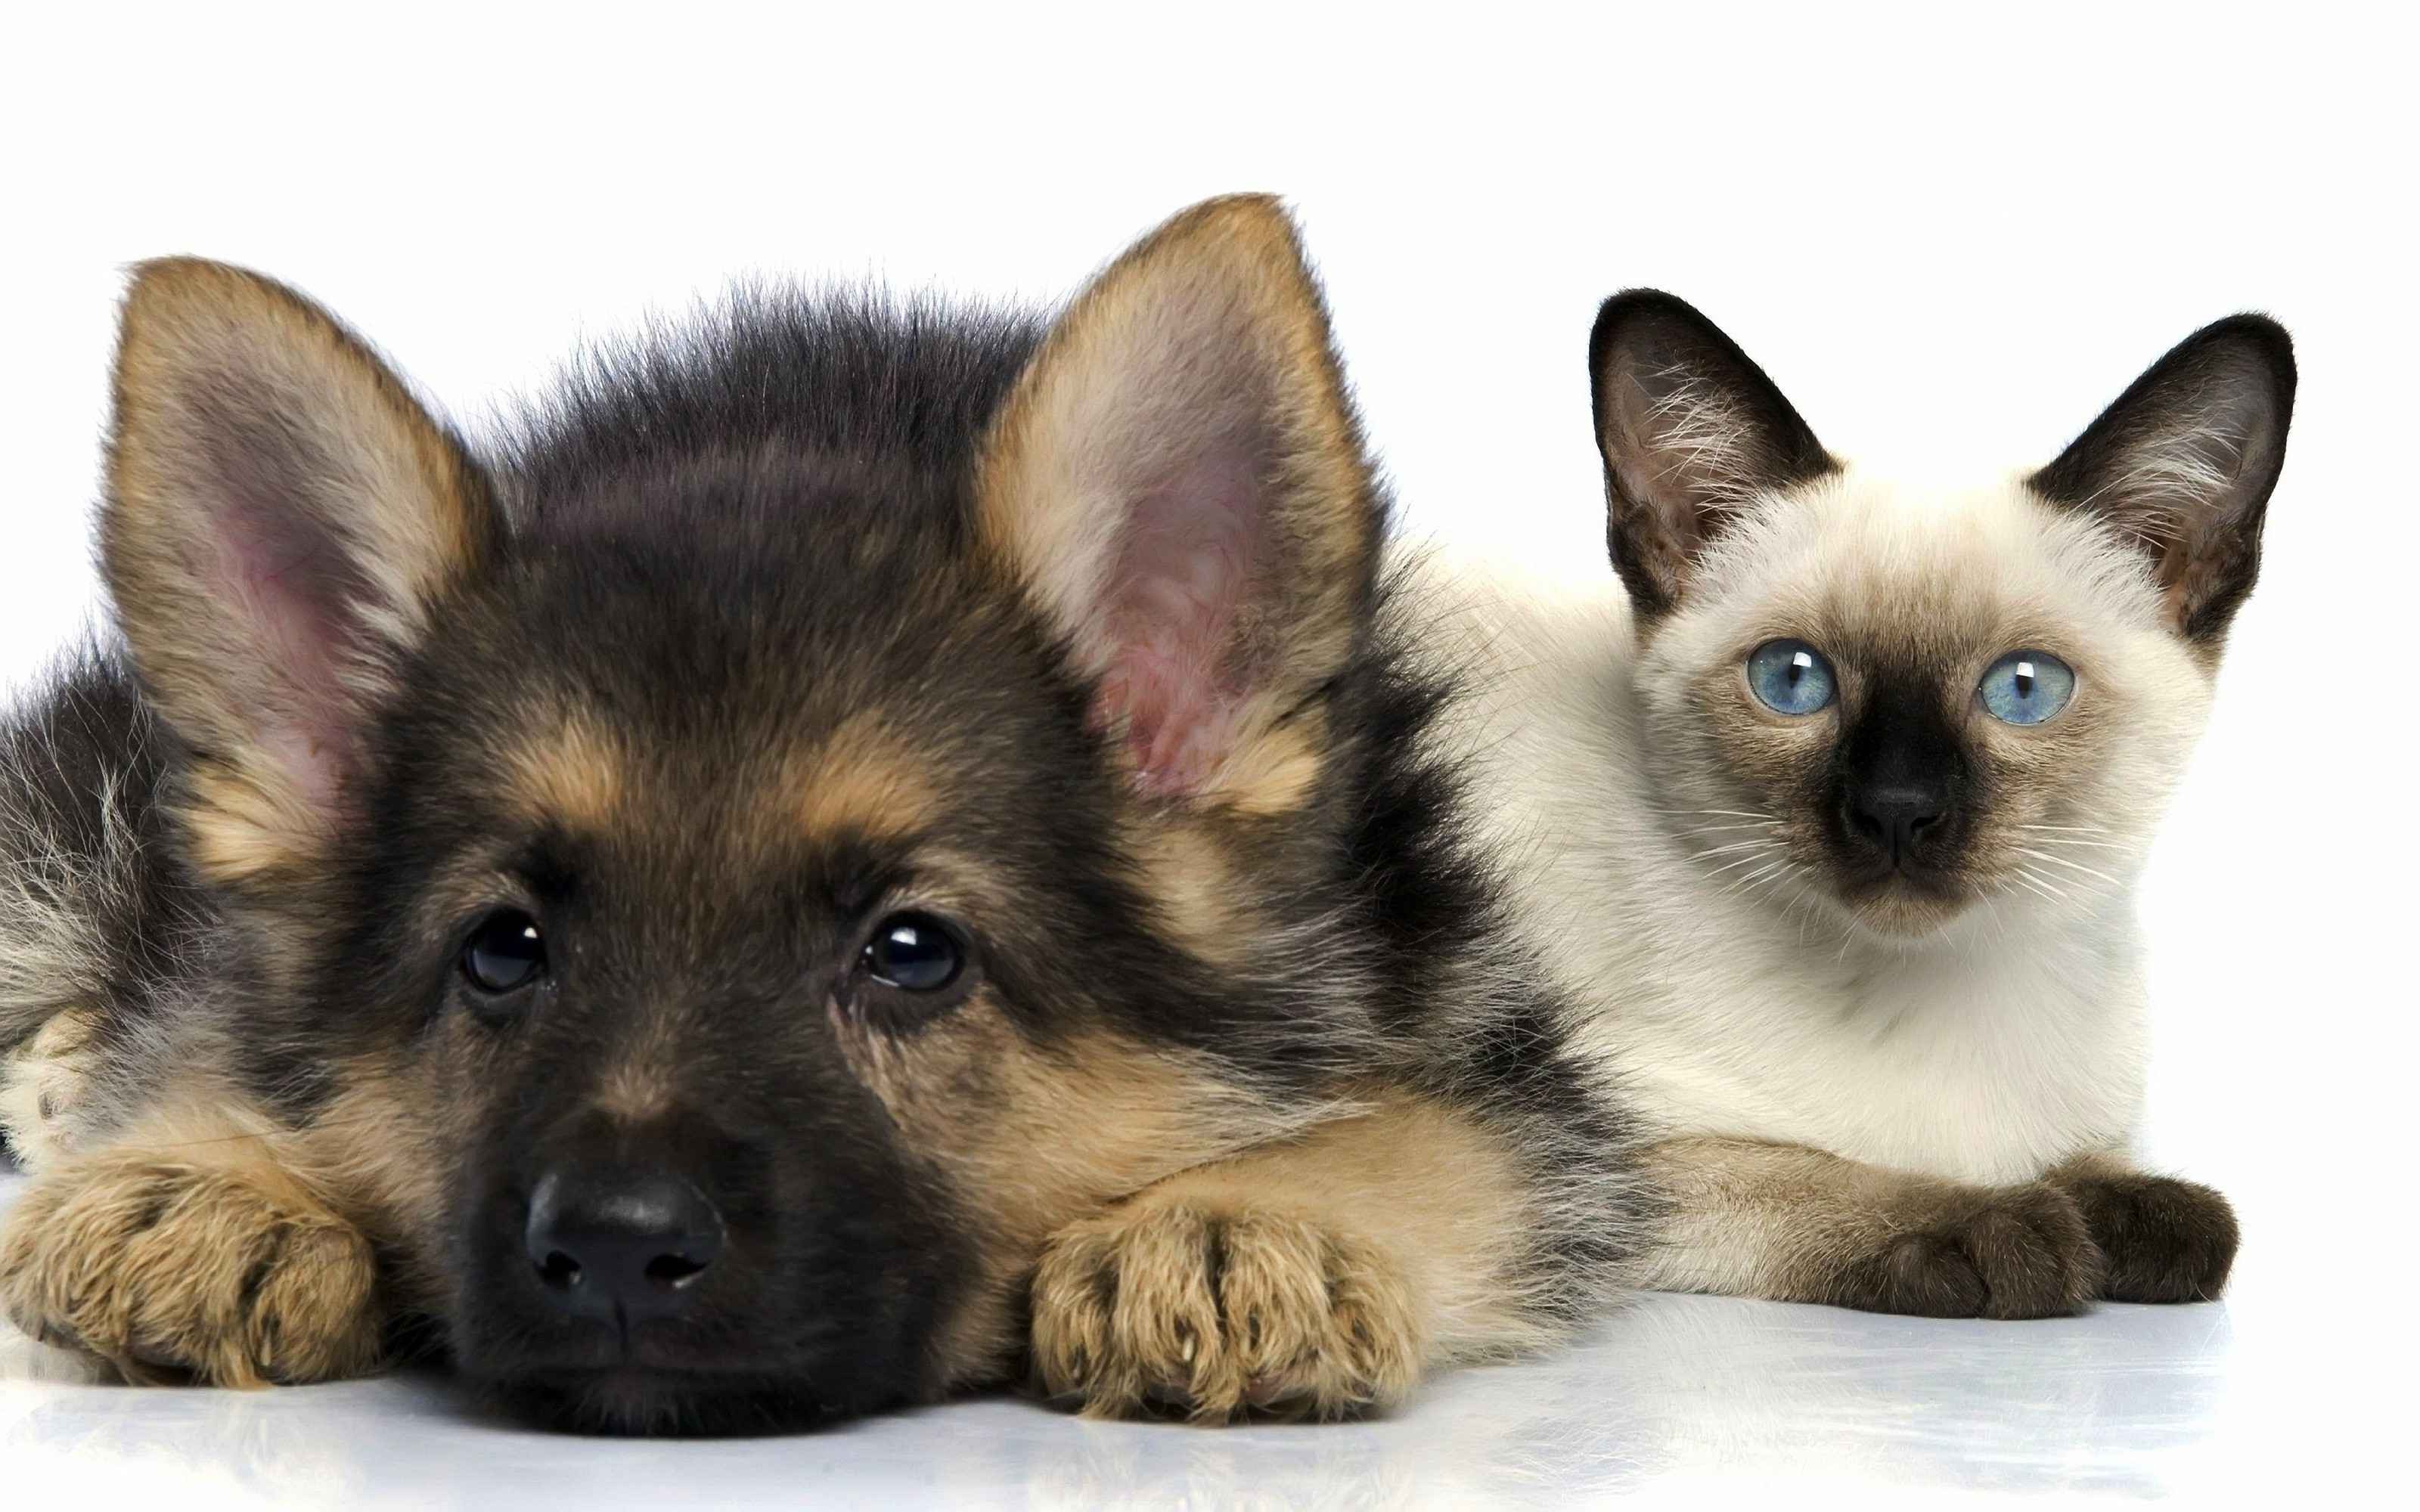  cat  dog  puppies Wallpapers  HD  Desktop and Mobile Backgrounds 